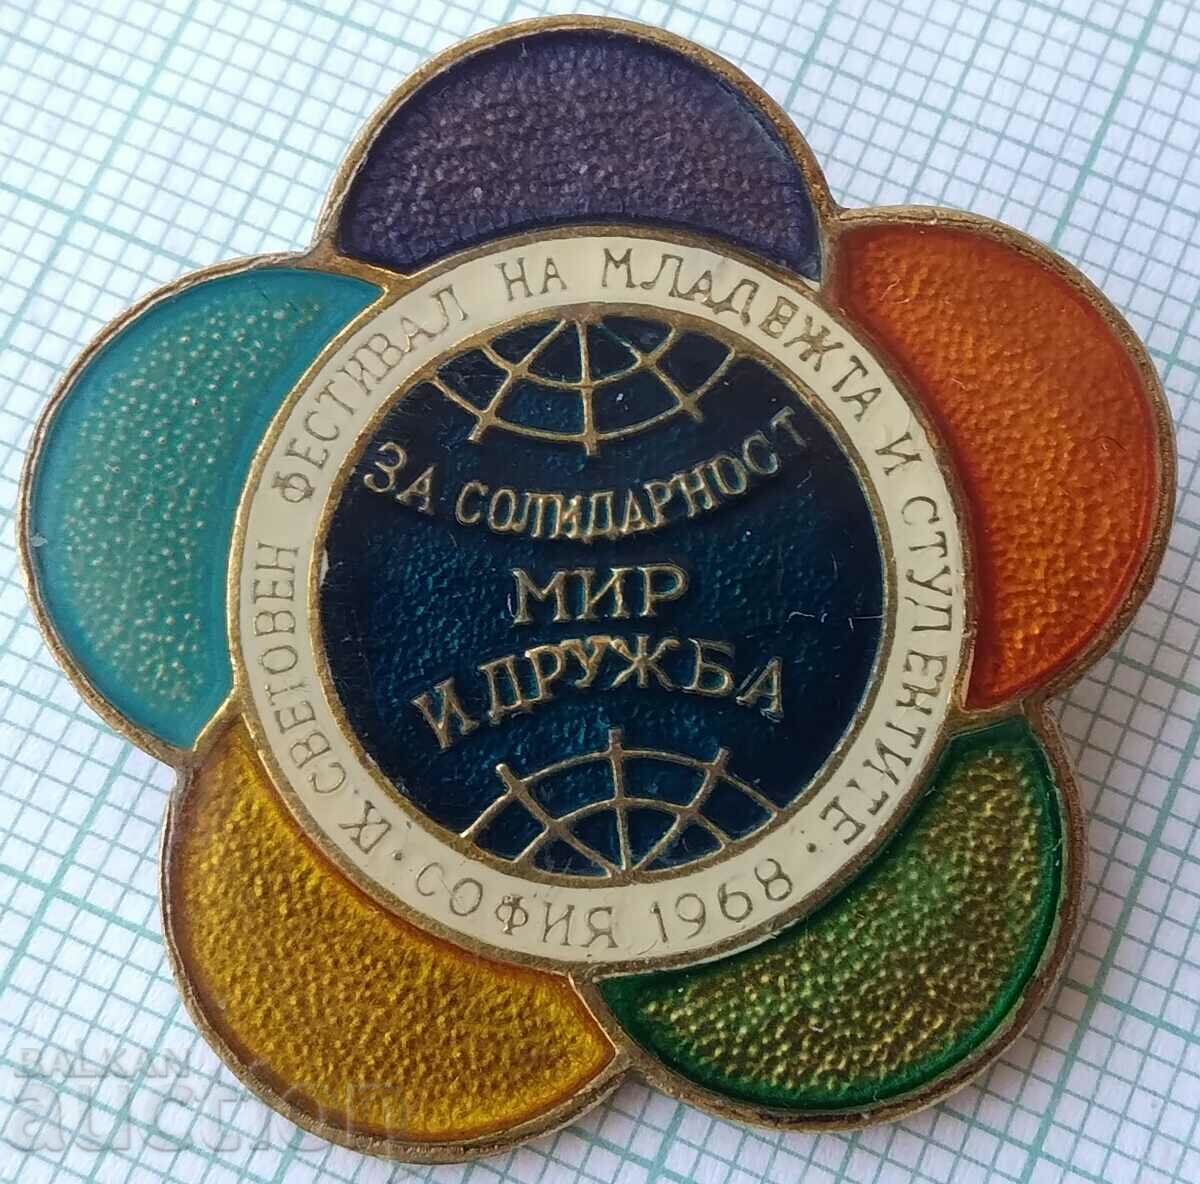 16277 Badge - Festival for Youth and Students Moscow 1968